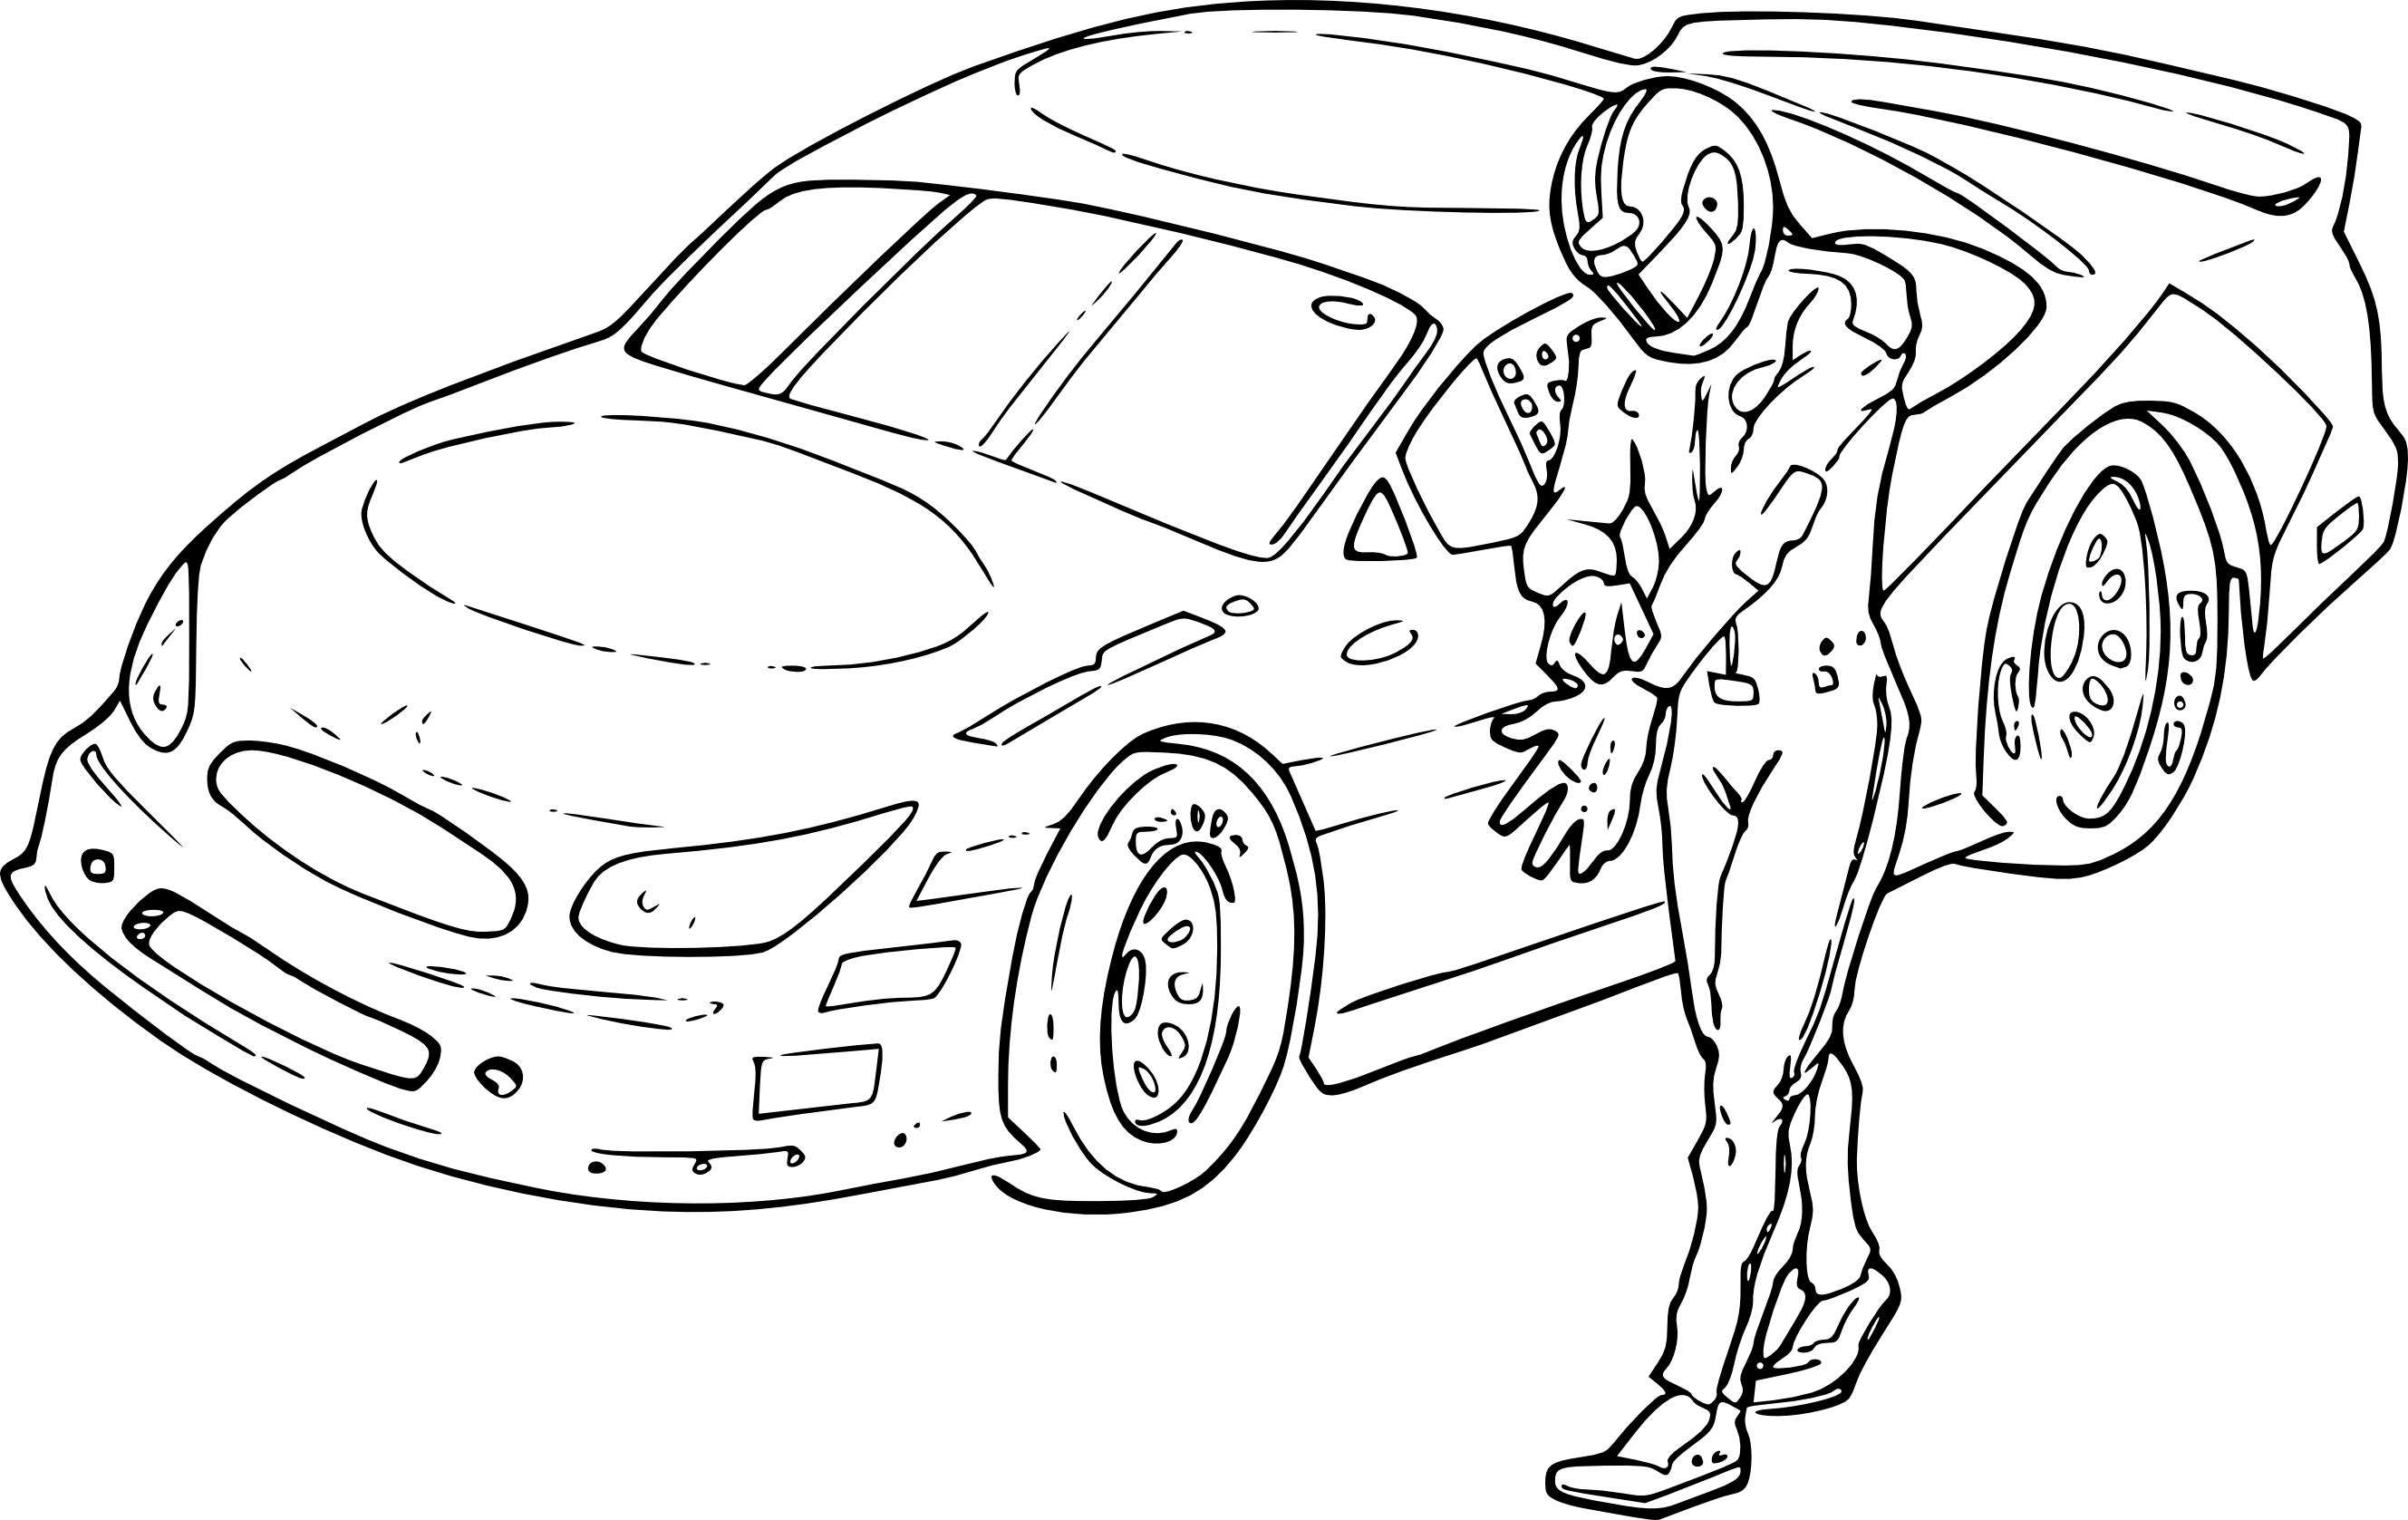 Rally Car drawing and coloring page